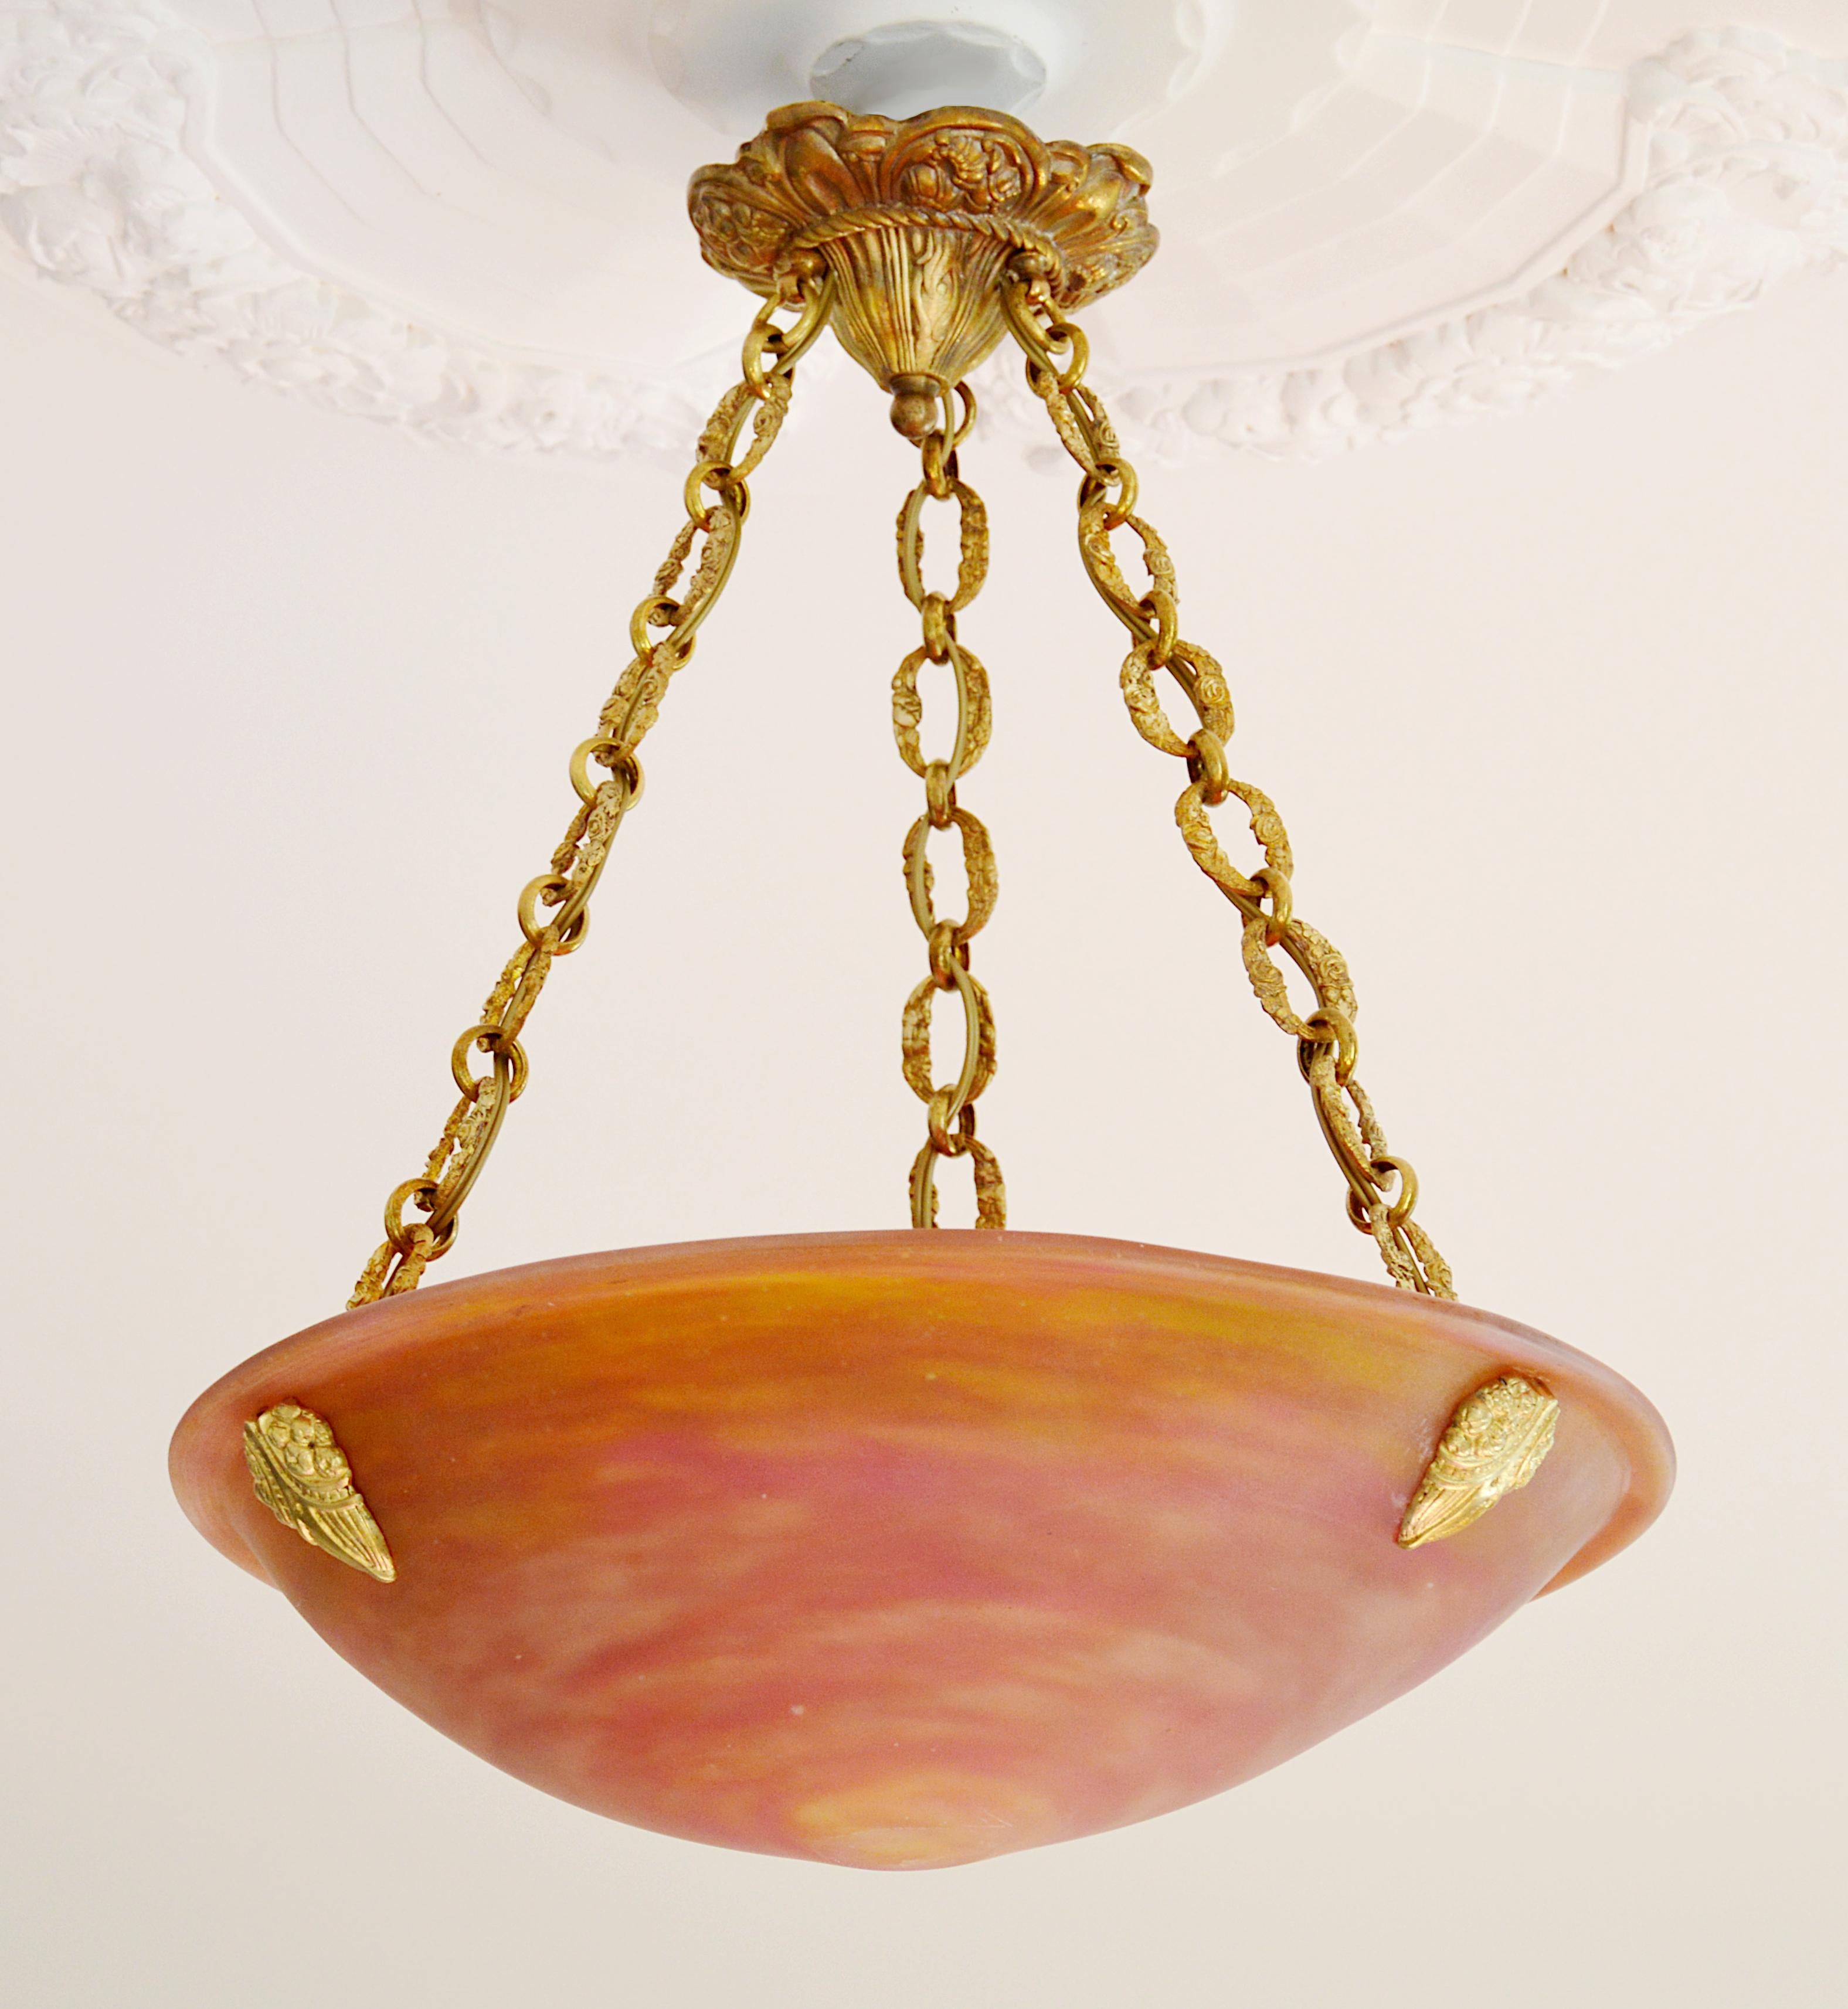 Antique French Art Deco / Nouveau pendant chandelier by Daum (Nancy) and Charles Ranc (Paris), France, 1910-1915. Blown double glass shade by Daum hung at its solid bronze fixture by Charles Ranc. Measures: Height 18